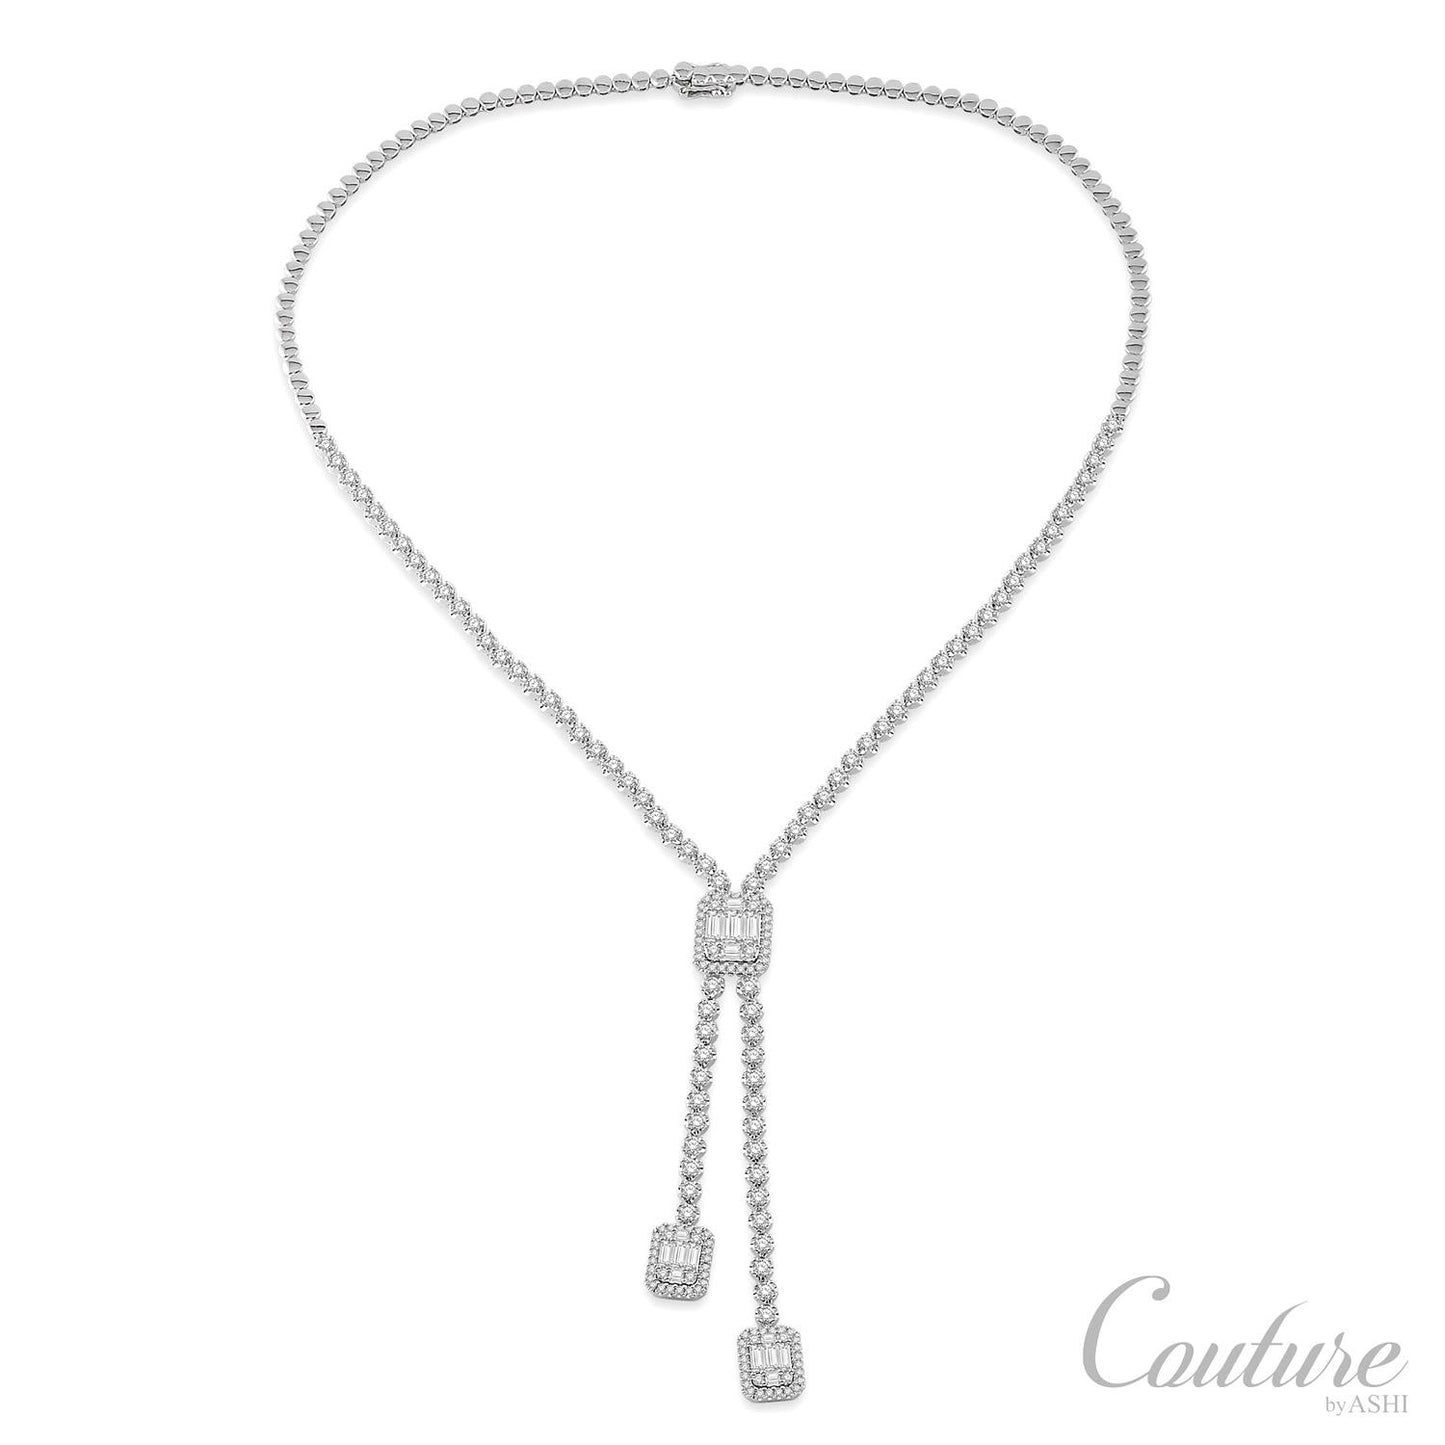 18k Couture Petite Baguette Negligee Necklace